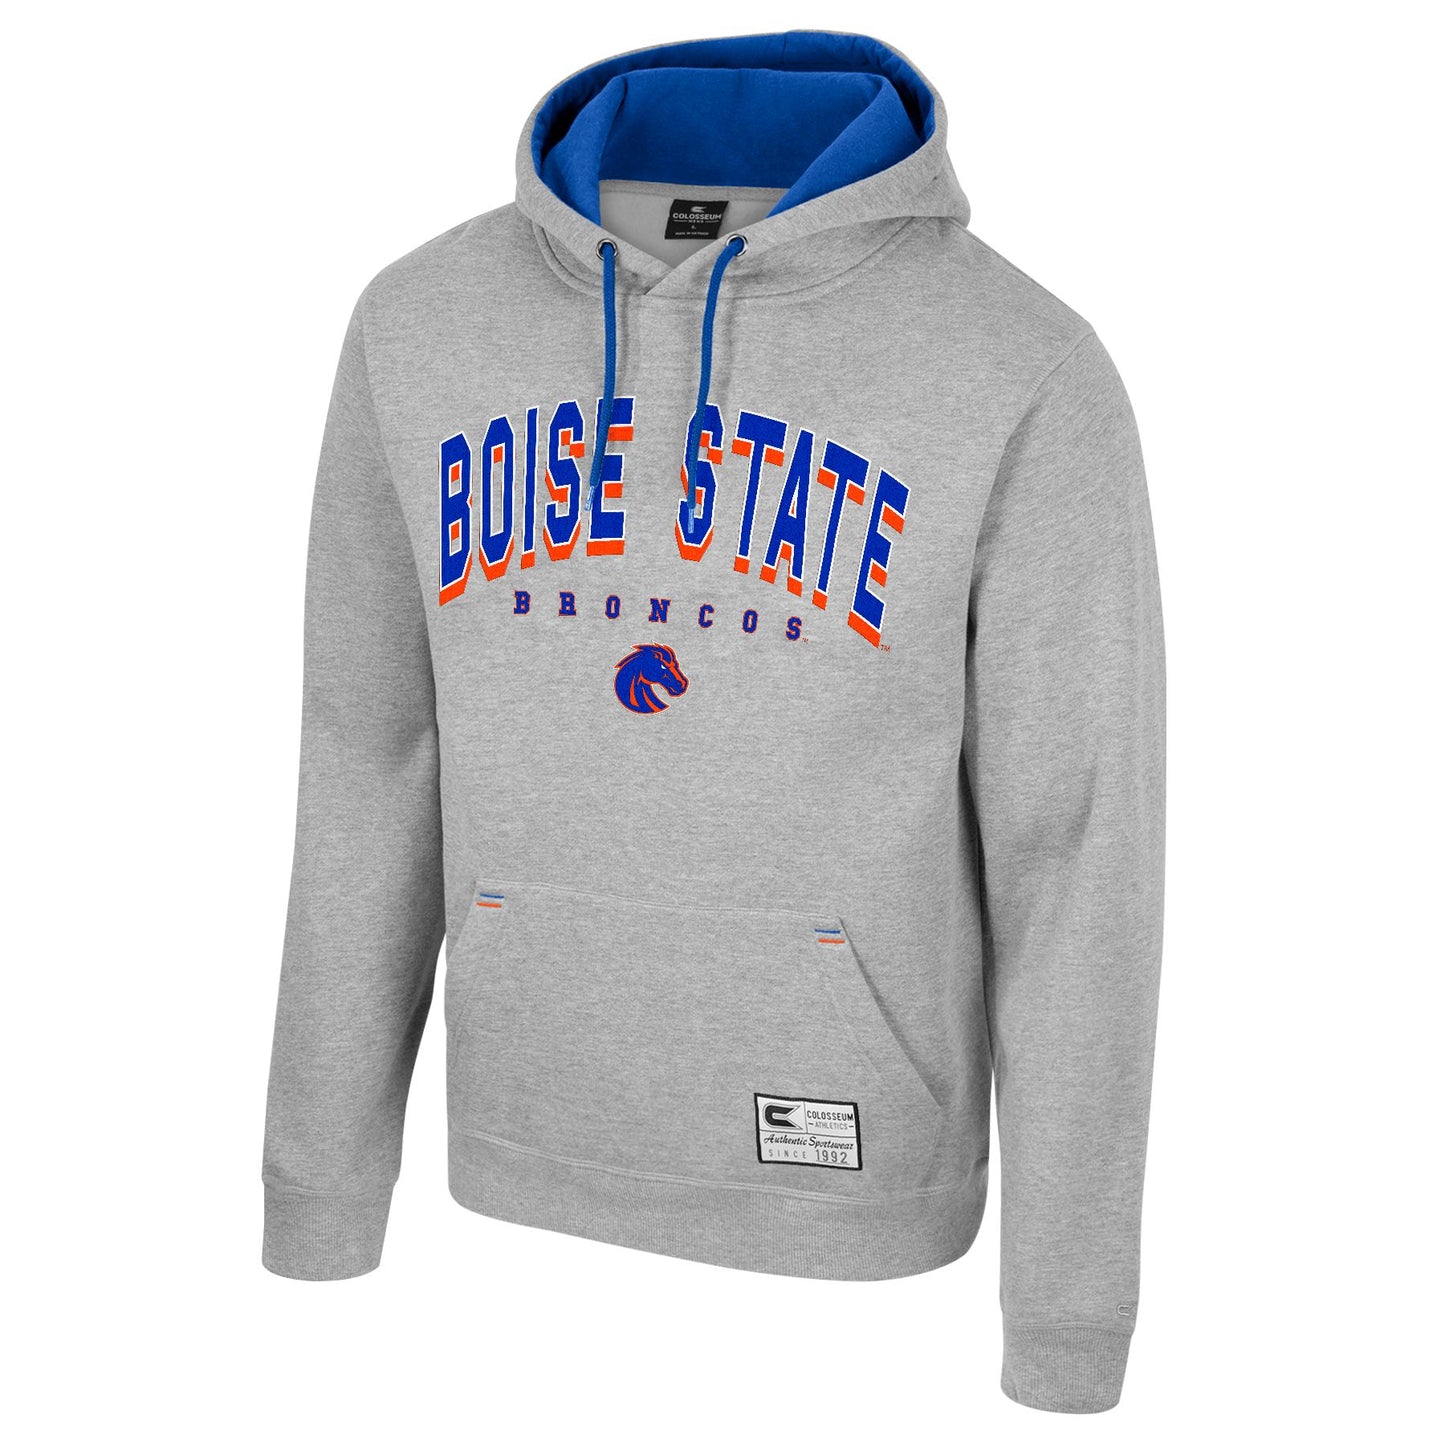 Boise State Broncos Men's Colosseum Pullover Hoodie (Grey)